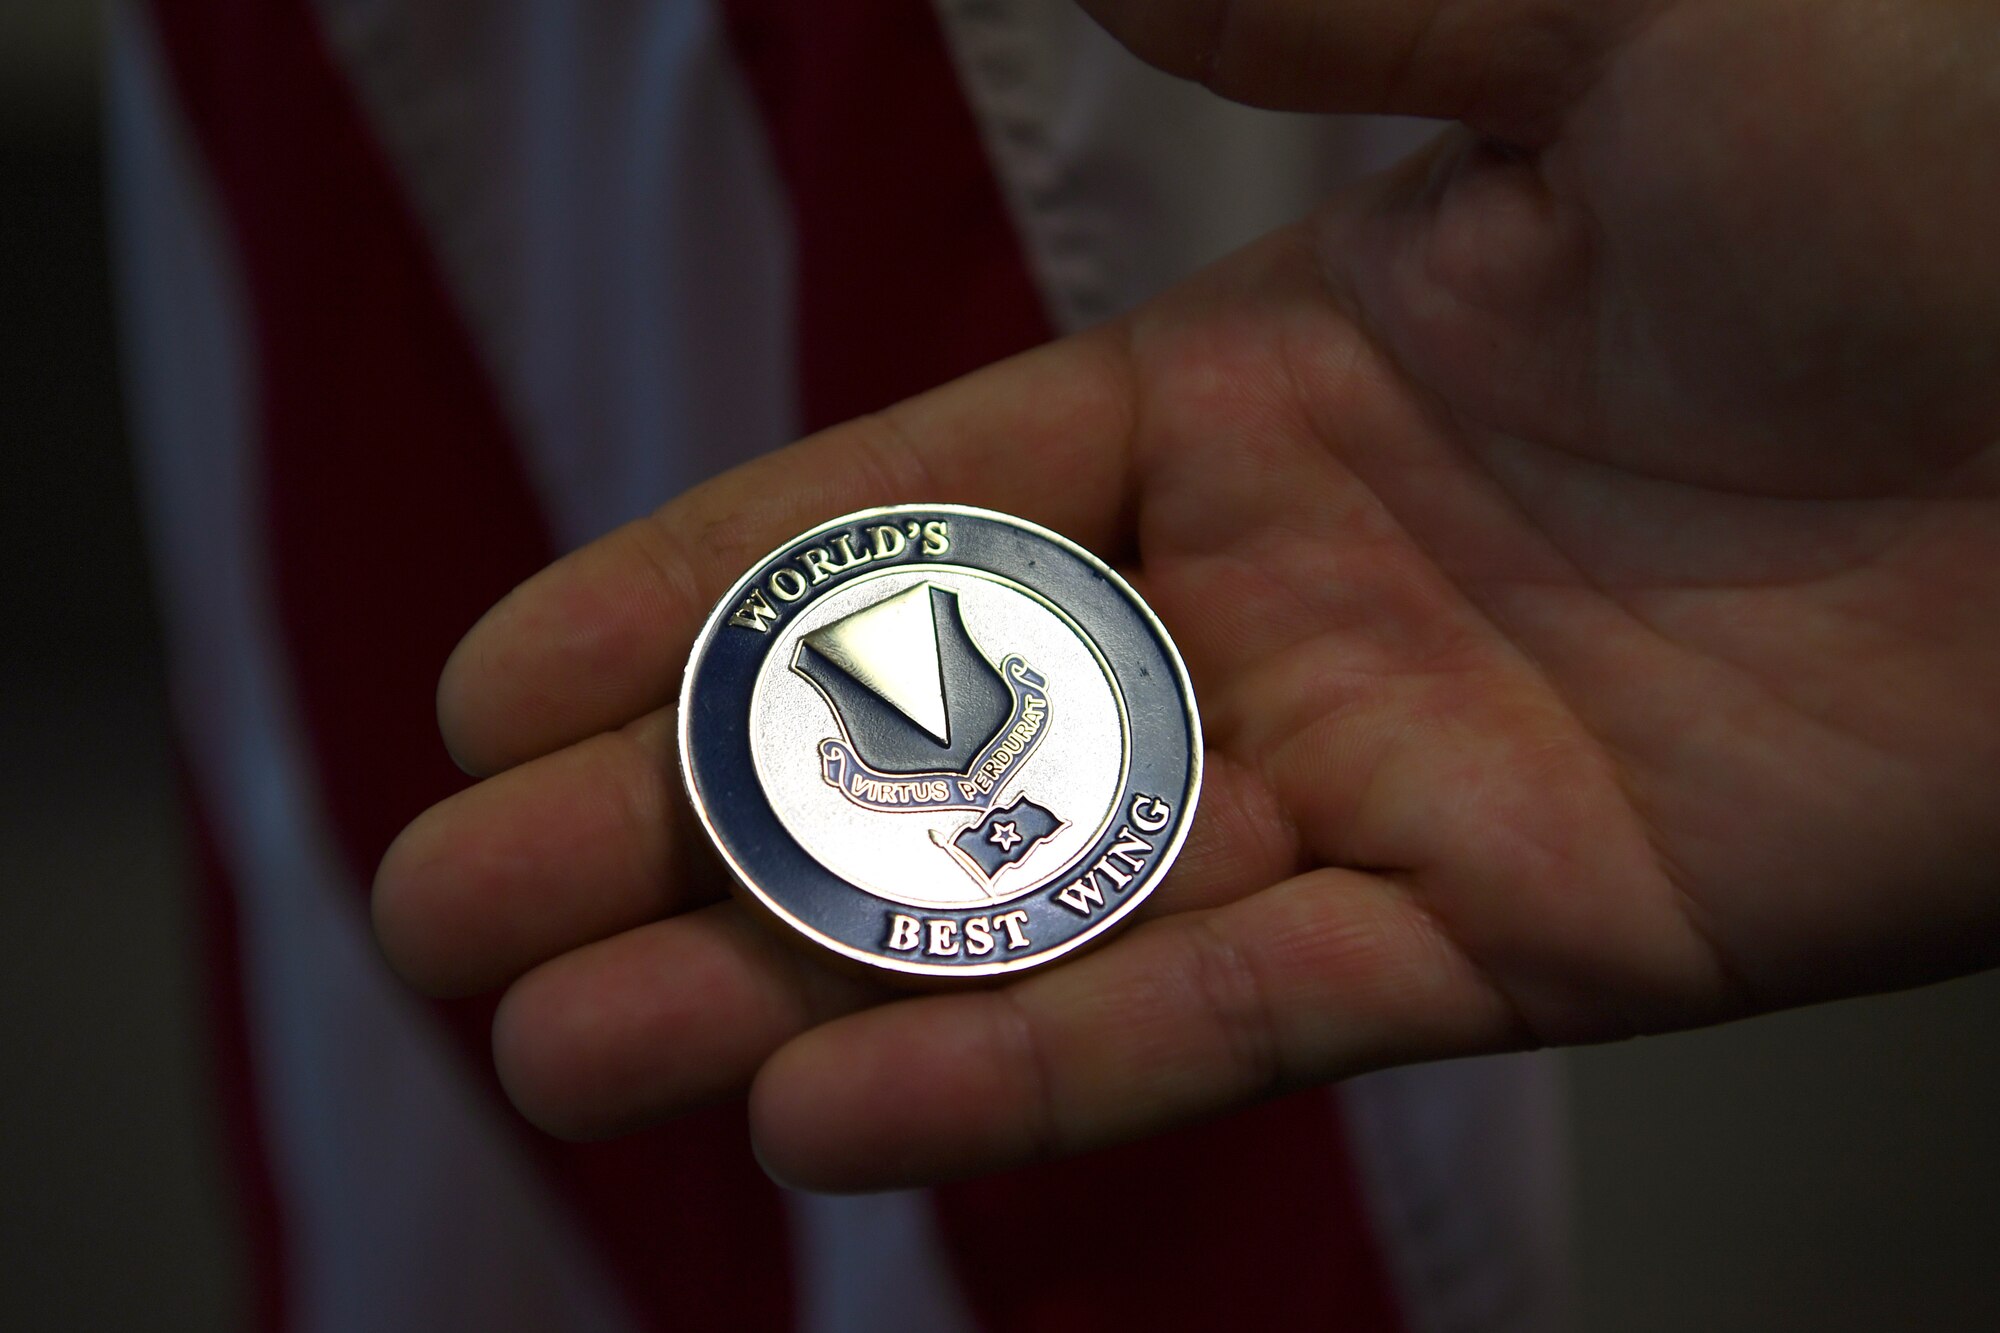 U.S. Air Force Staff Sgt. Wayne PhillipS, 76th Airlift Squadron flight attendant, holds his 86th Airlift Wing commander’s coin at the 76th Airlift Squadron headquarters building on Ramstein Air Base, Germany, June 27, 2019.